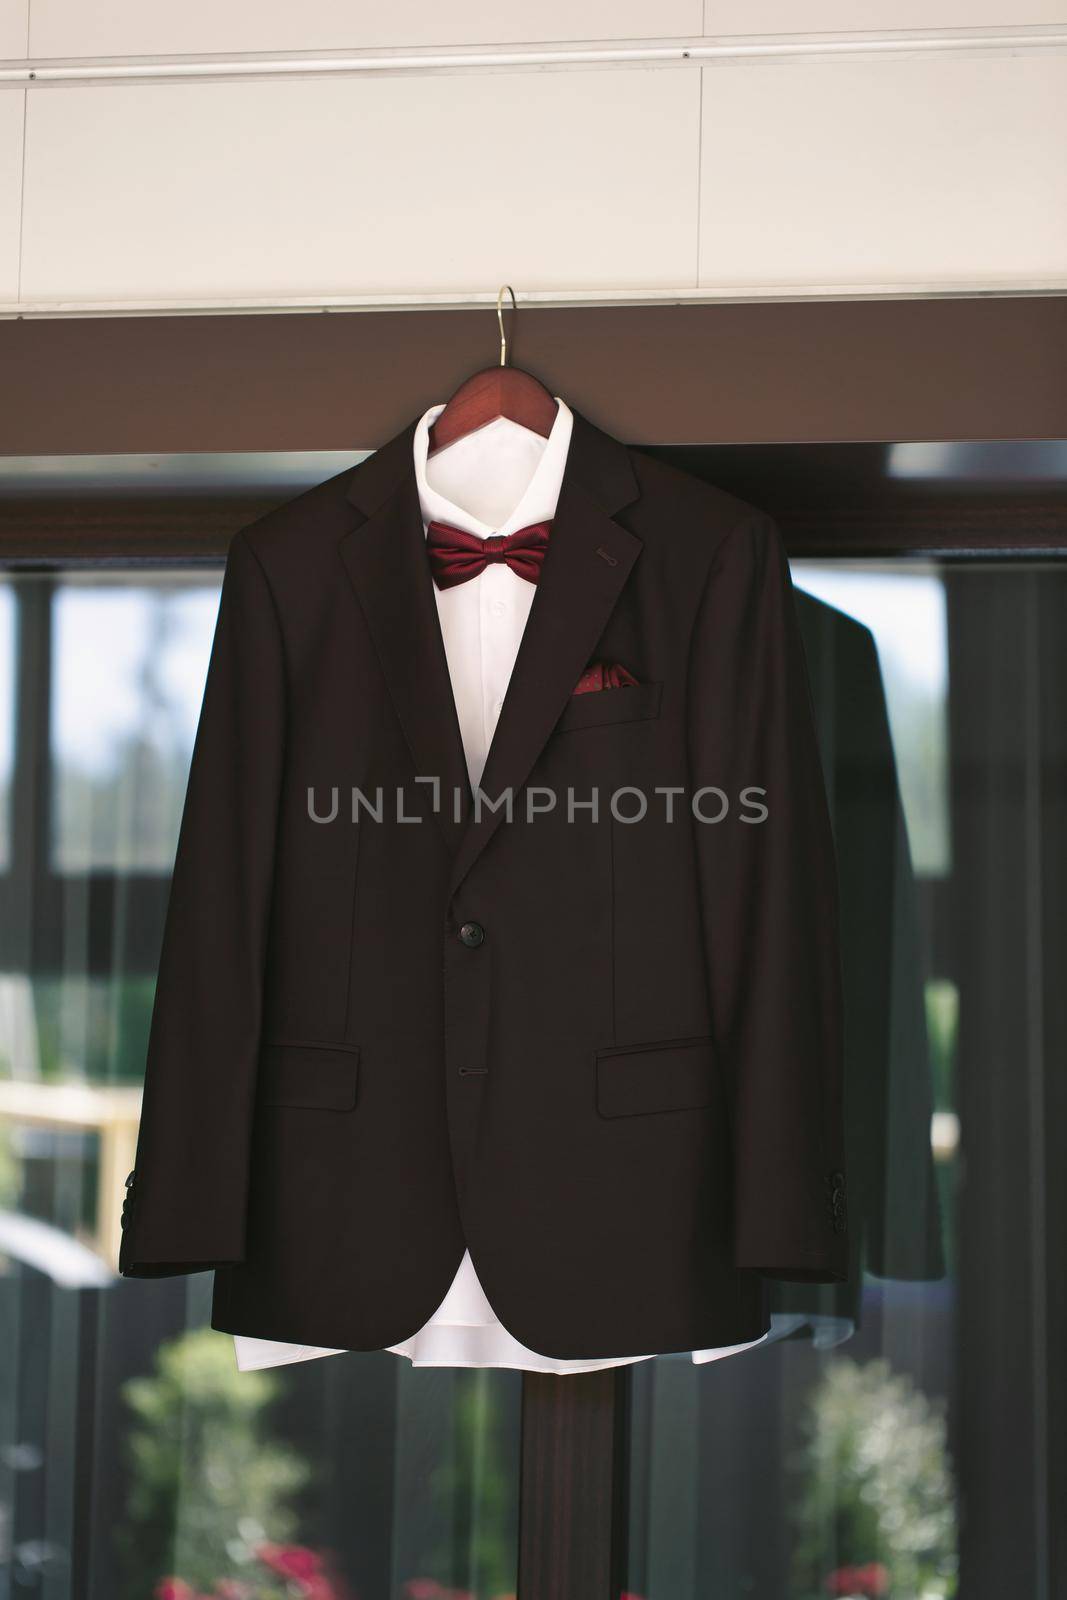 Suit jacket hanging on a hanger with a boutonniere in place.